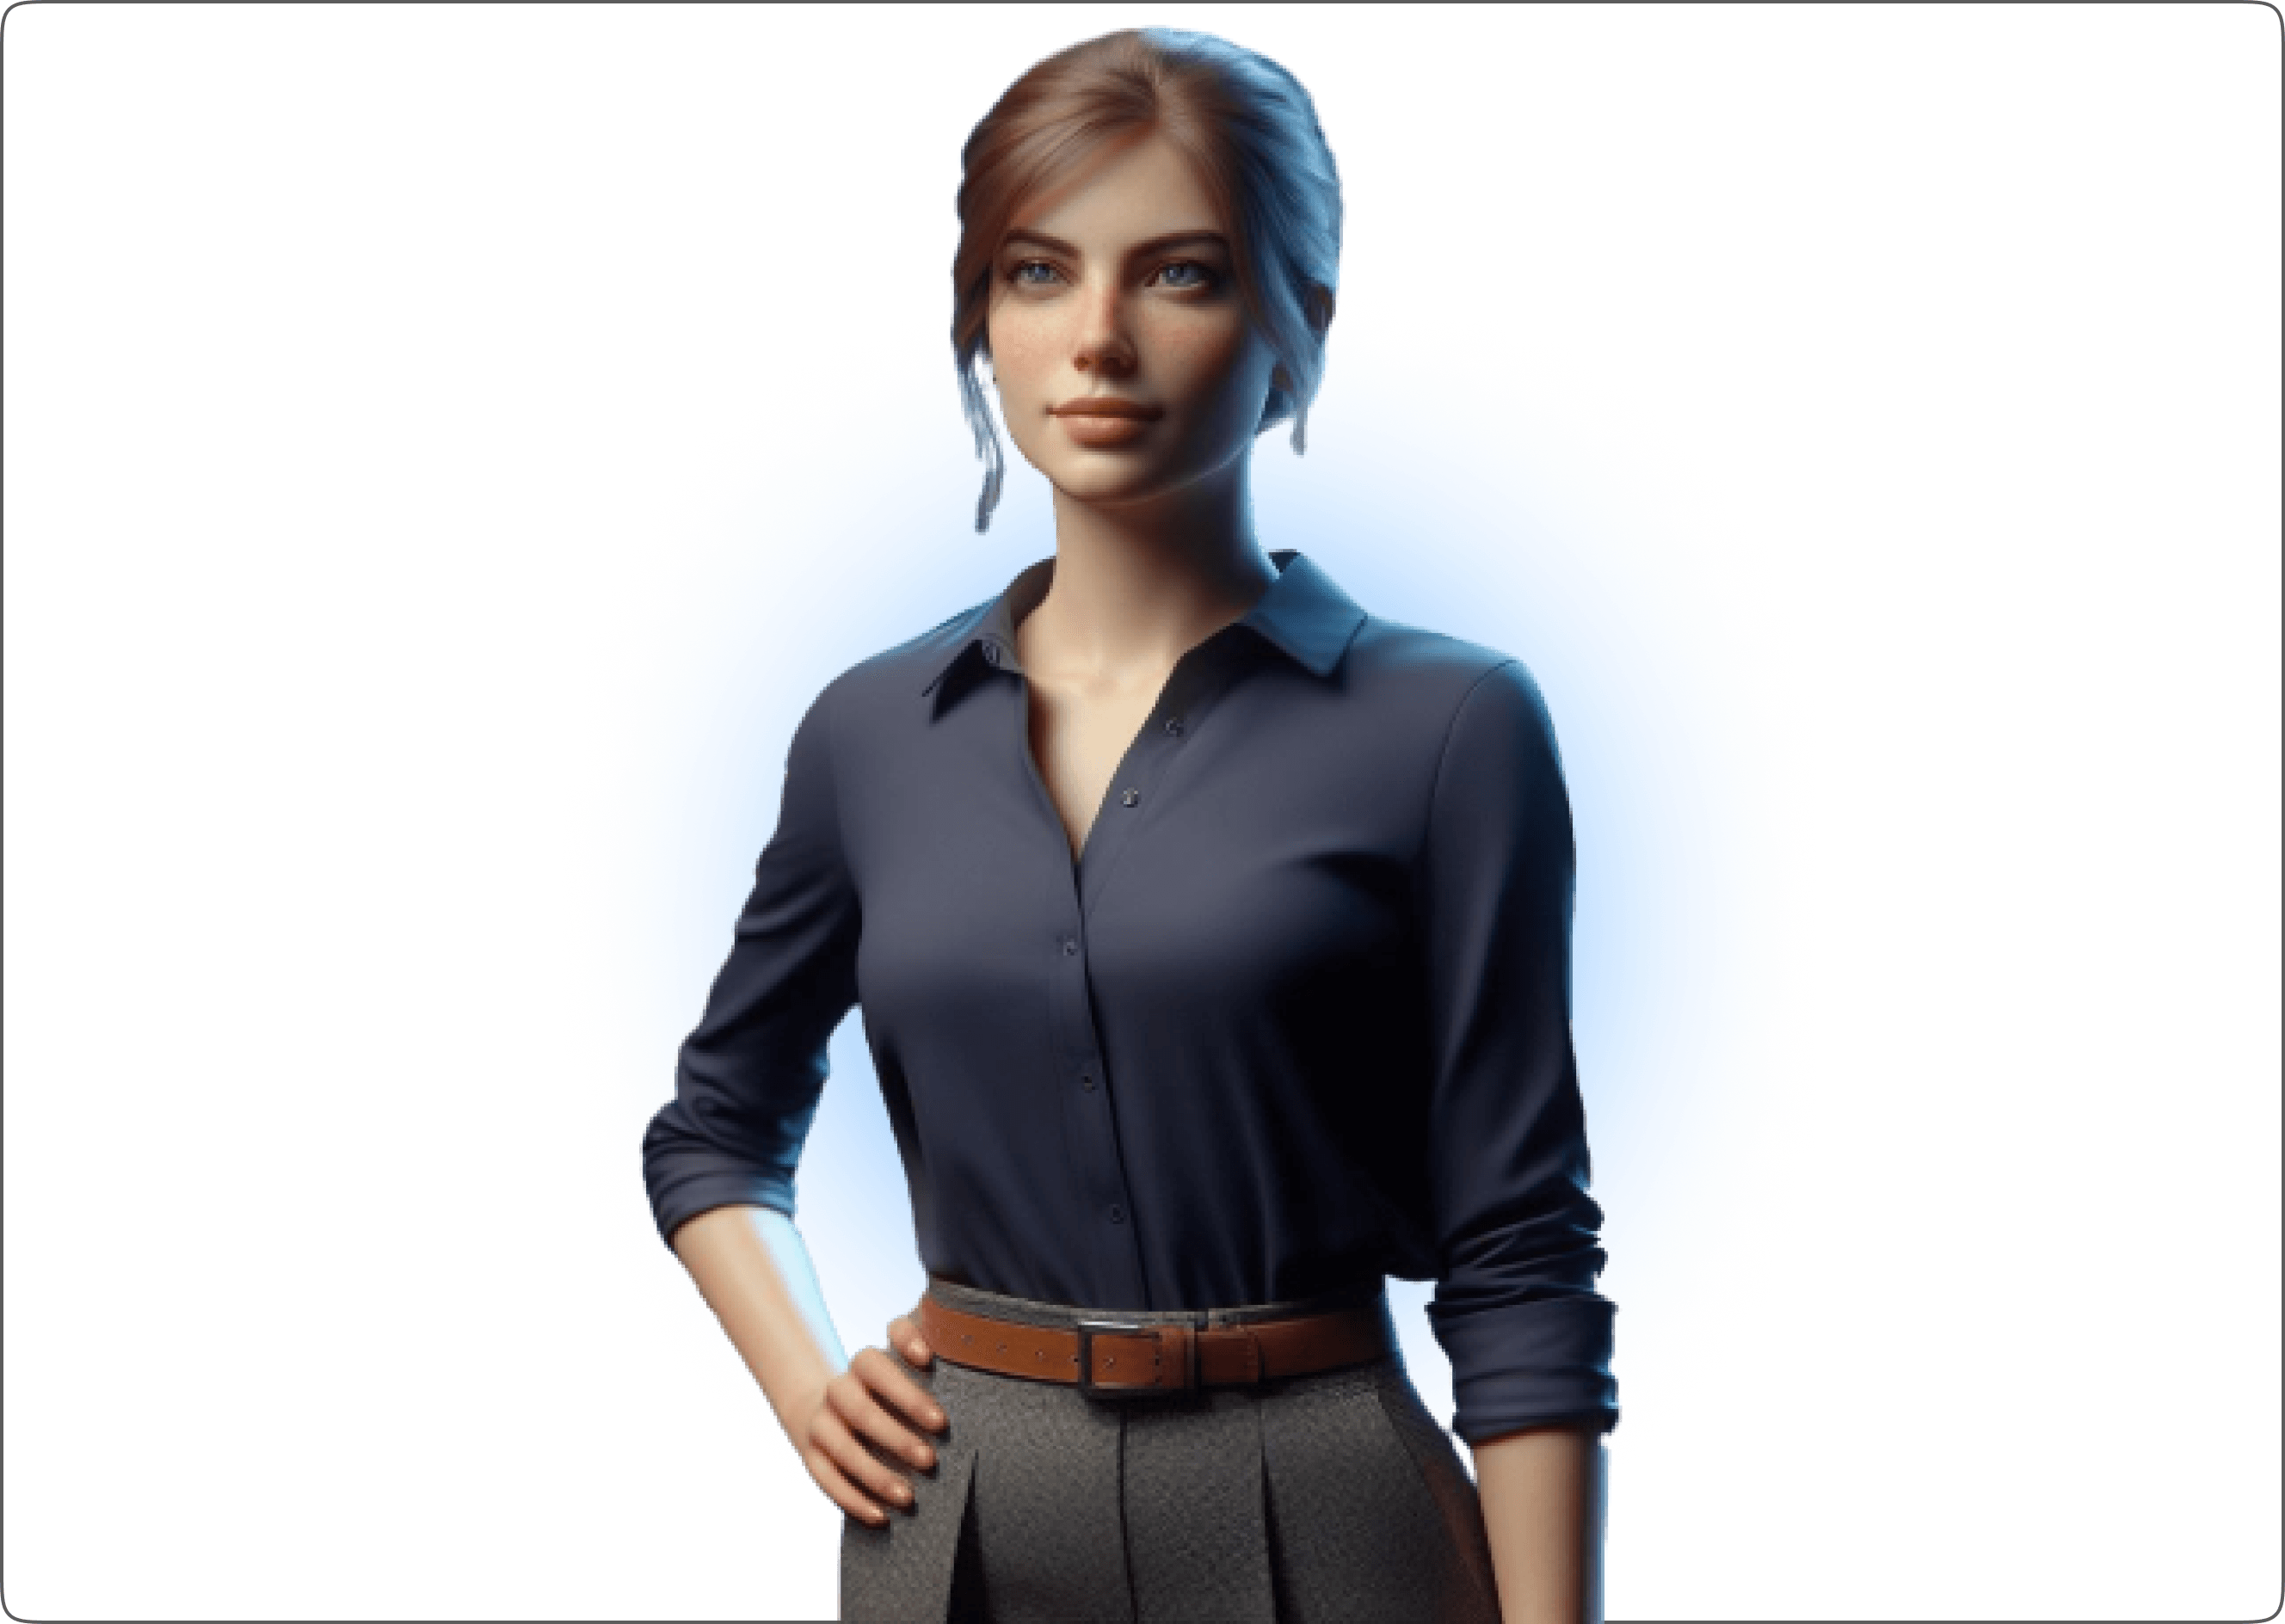 Female Character Creation using Gen AI